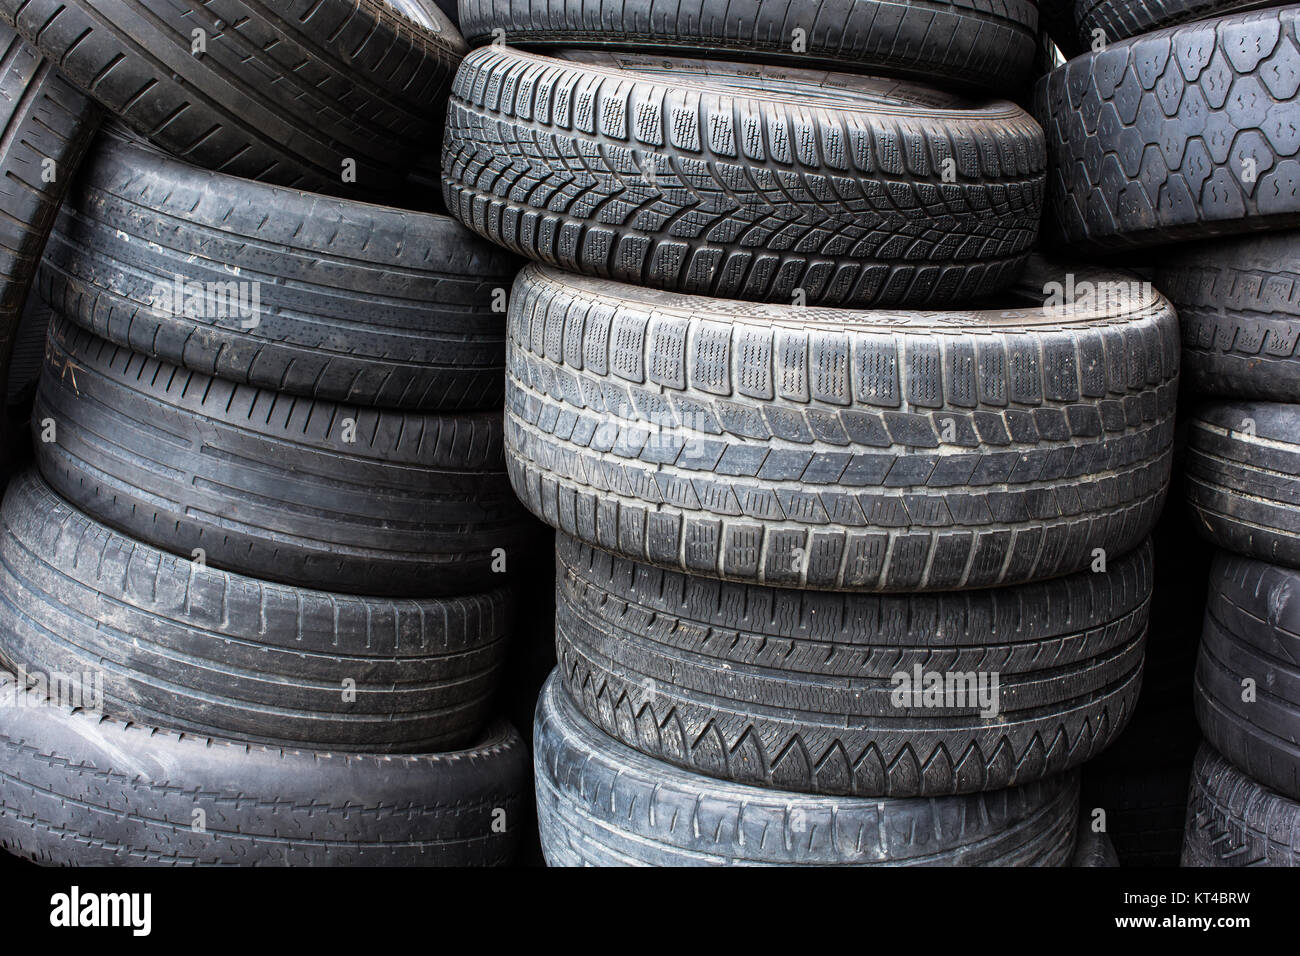 Tires for sale at a tire store - stacks of old used tires Stock Photo